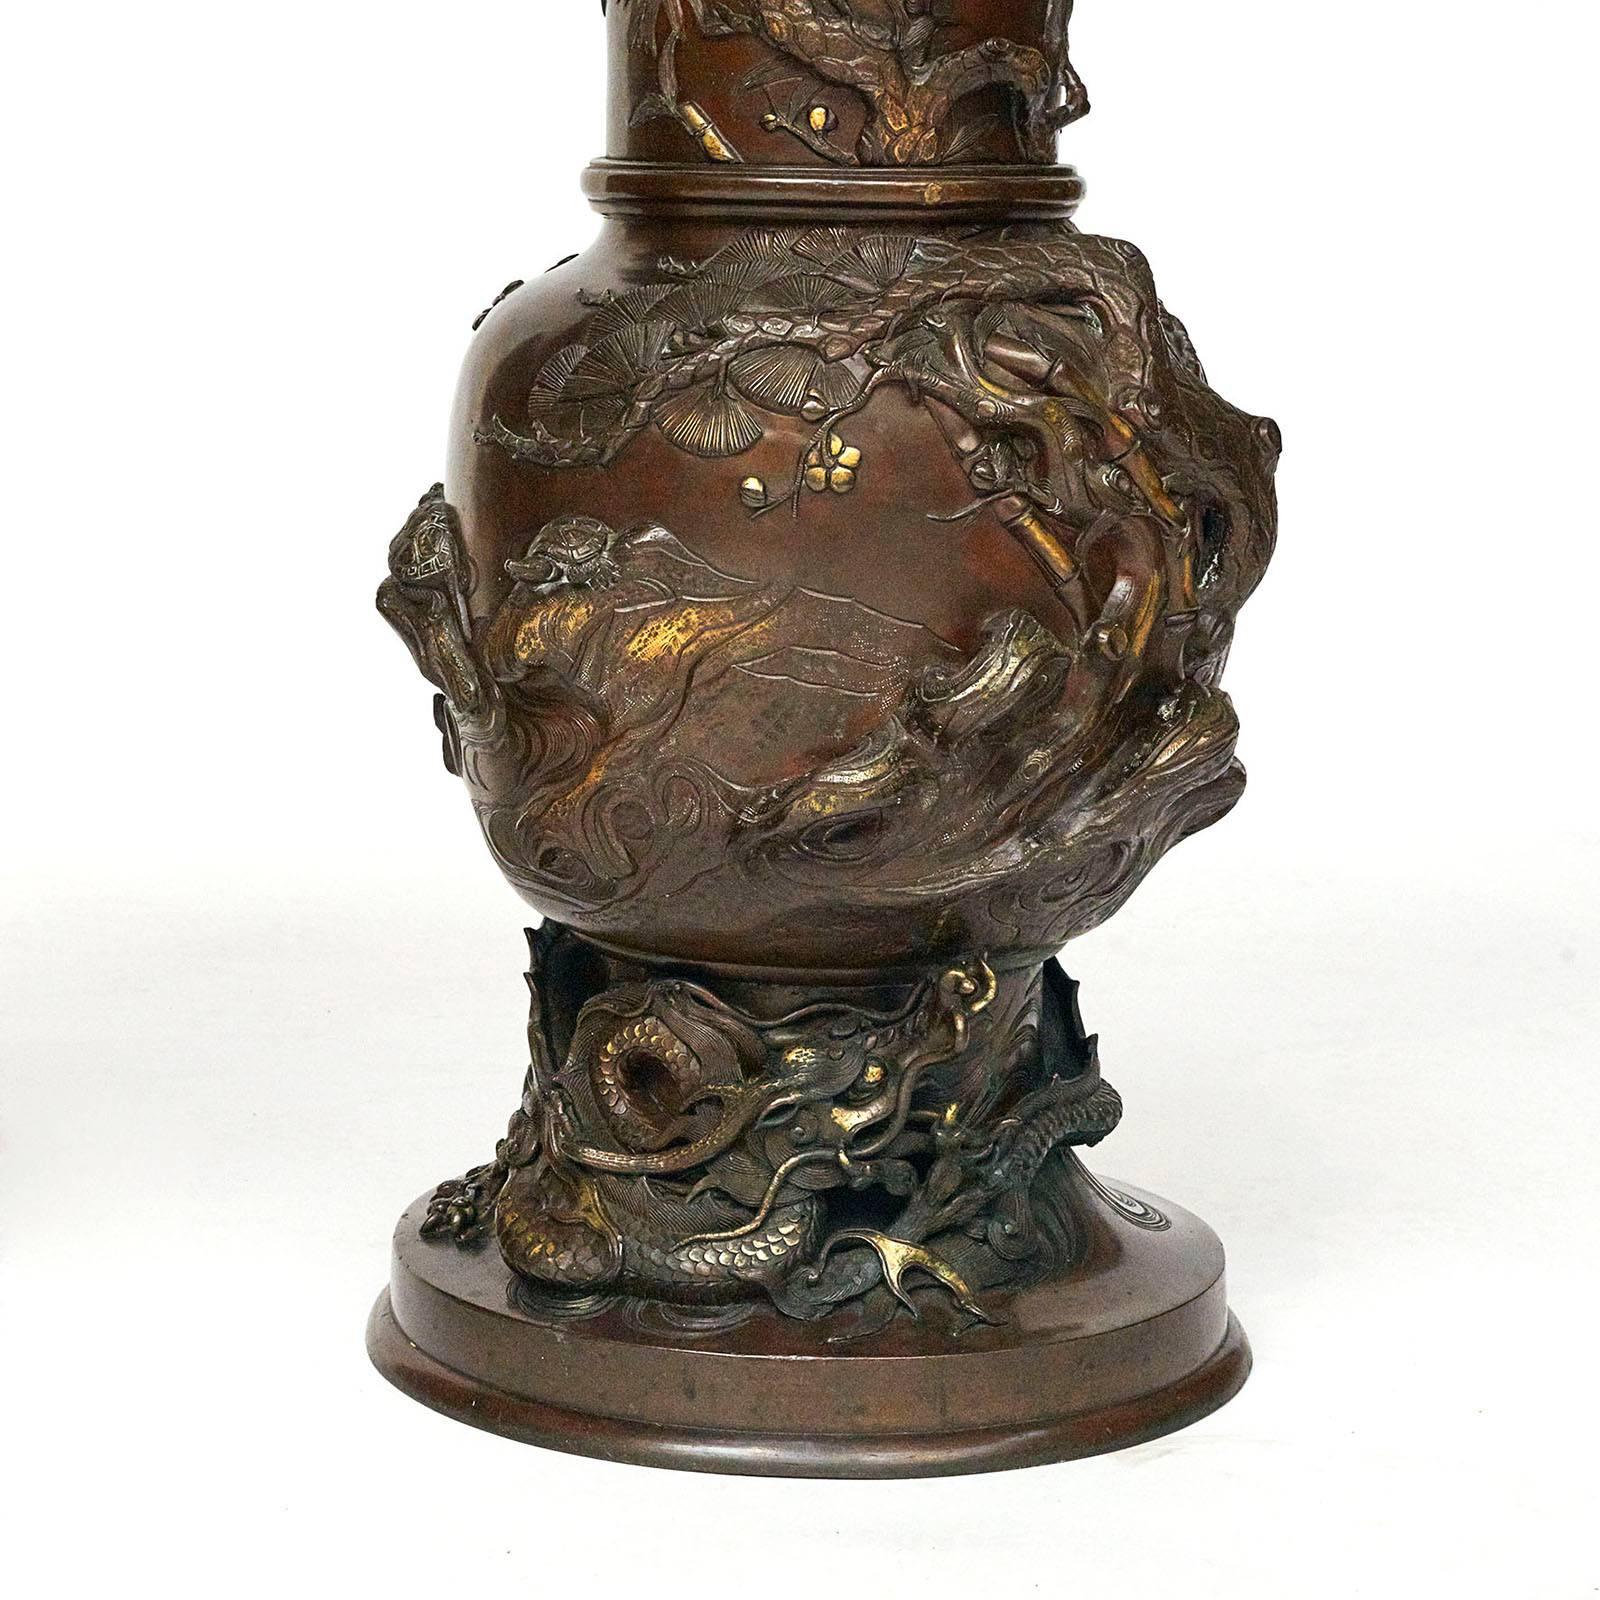 A pair of unusual large Japanese cast bronze vases, Meiji period, 1860-1912. Patinated bronze with bronze highlights, the top lip with a Greek key frieze, the neck and body with cast branches, turtles, and birds, the lower part with a large dragon